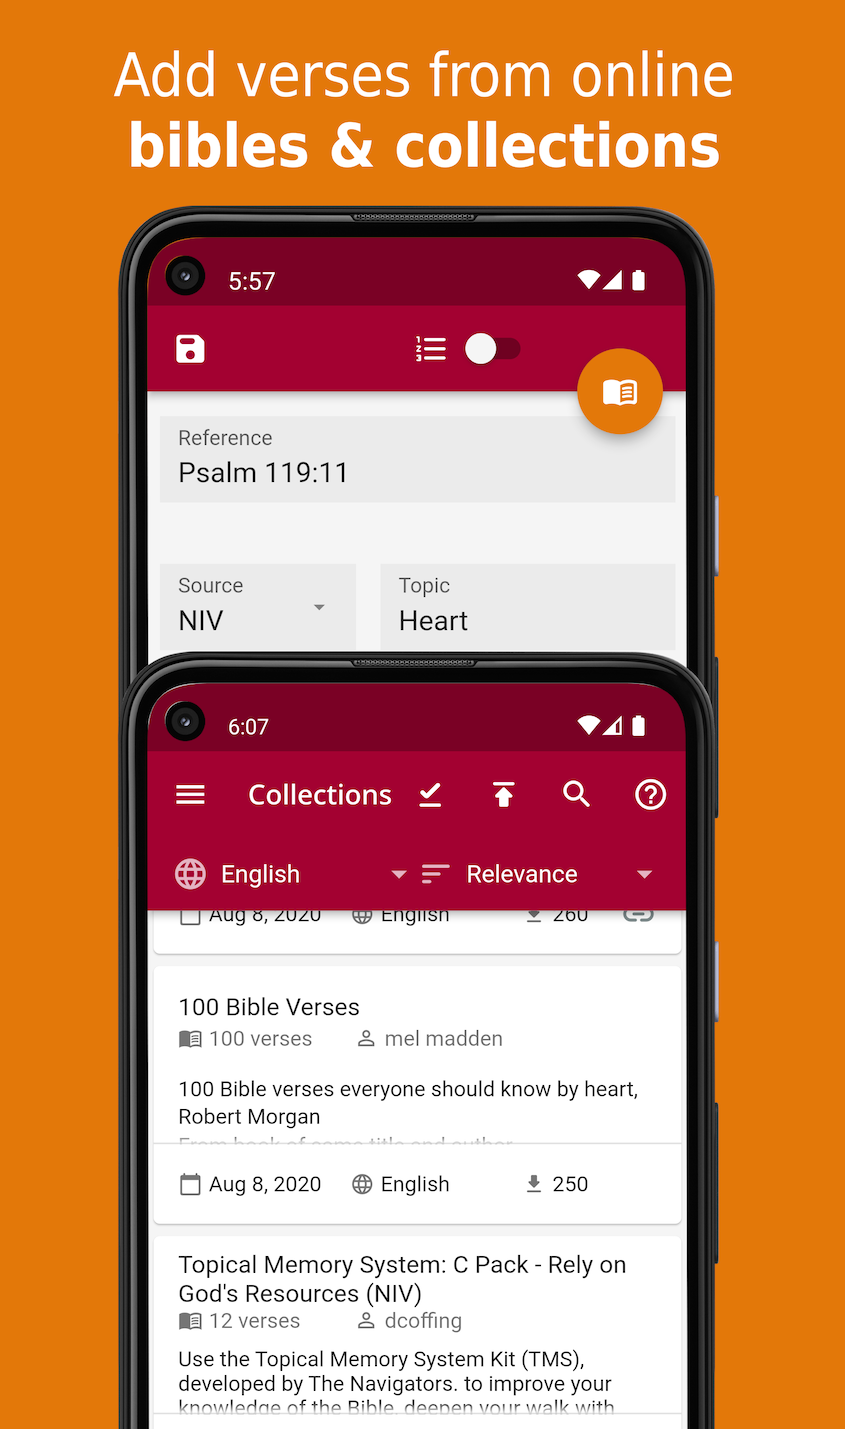 Add verses from online bibles and collections